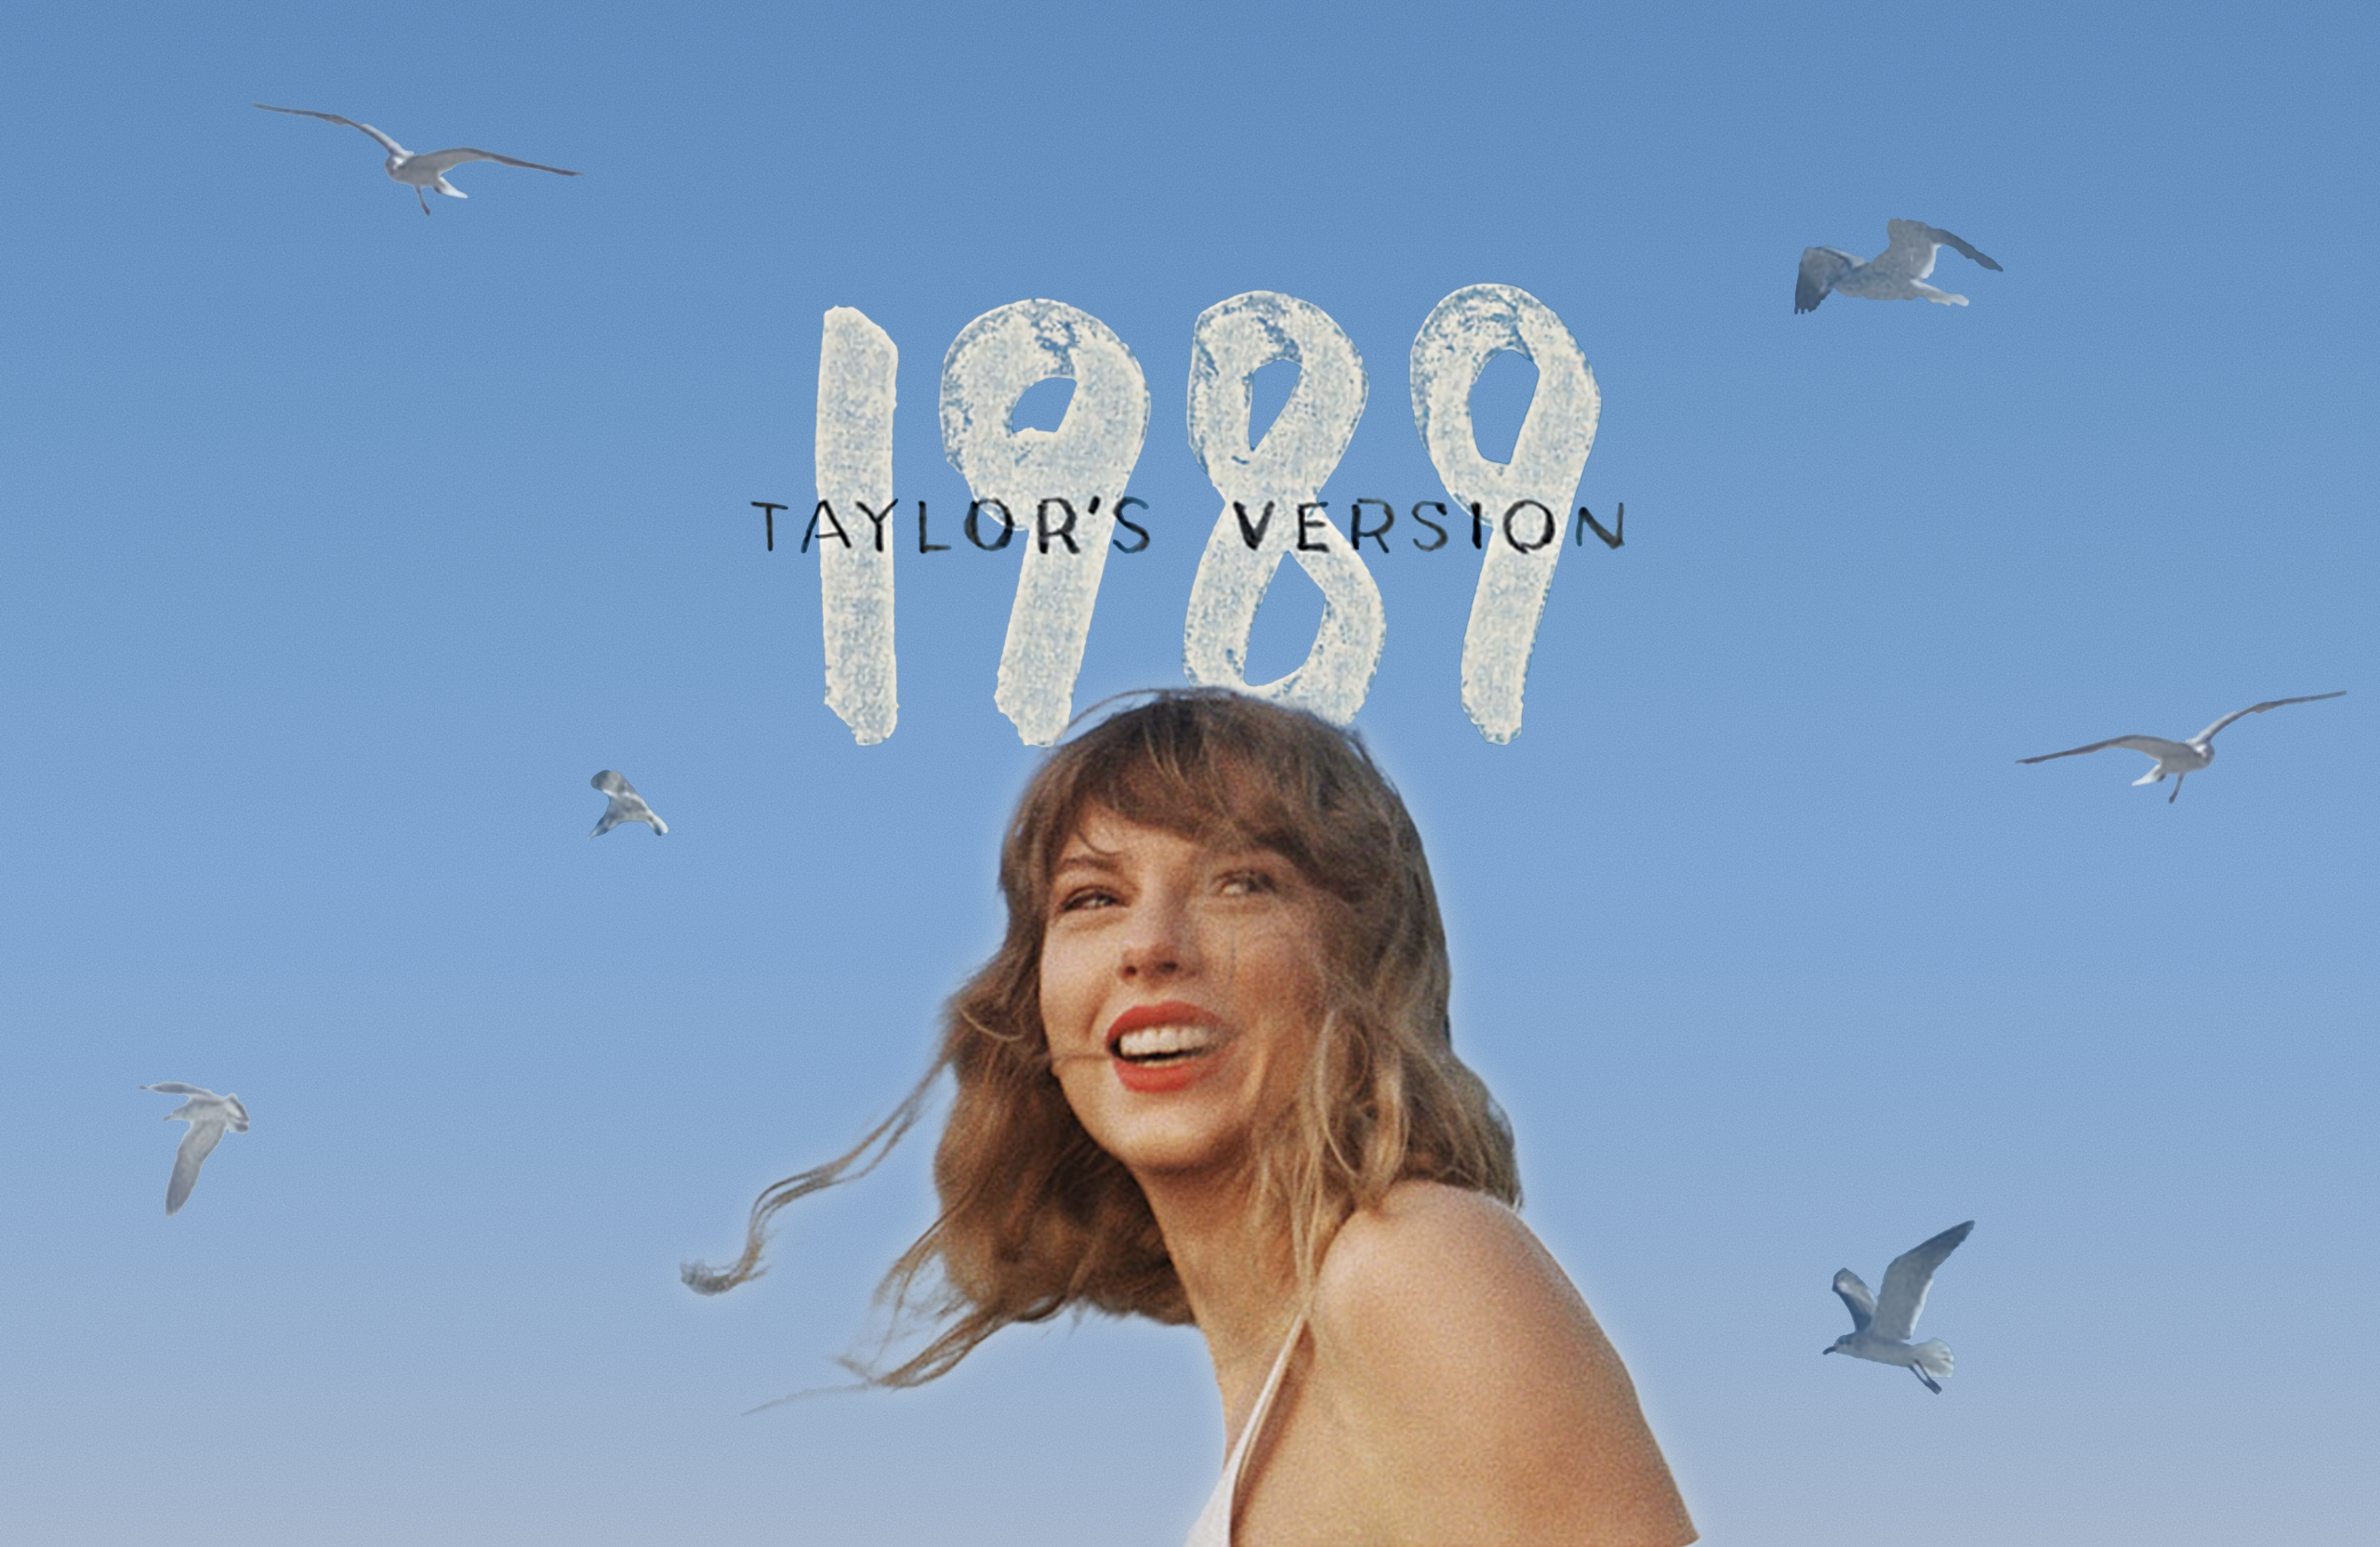 Taylor's Version wallpaper for phone and laptop! (made by me)